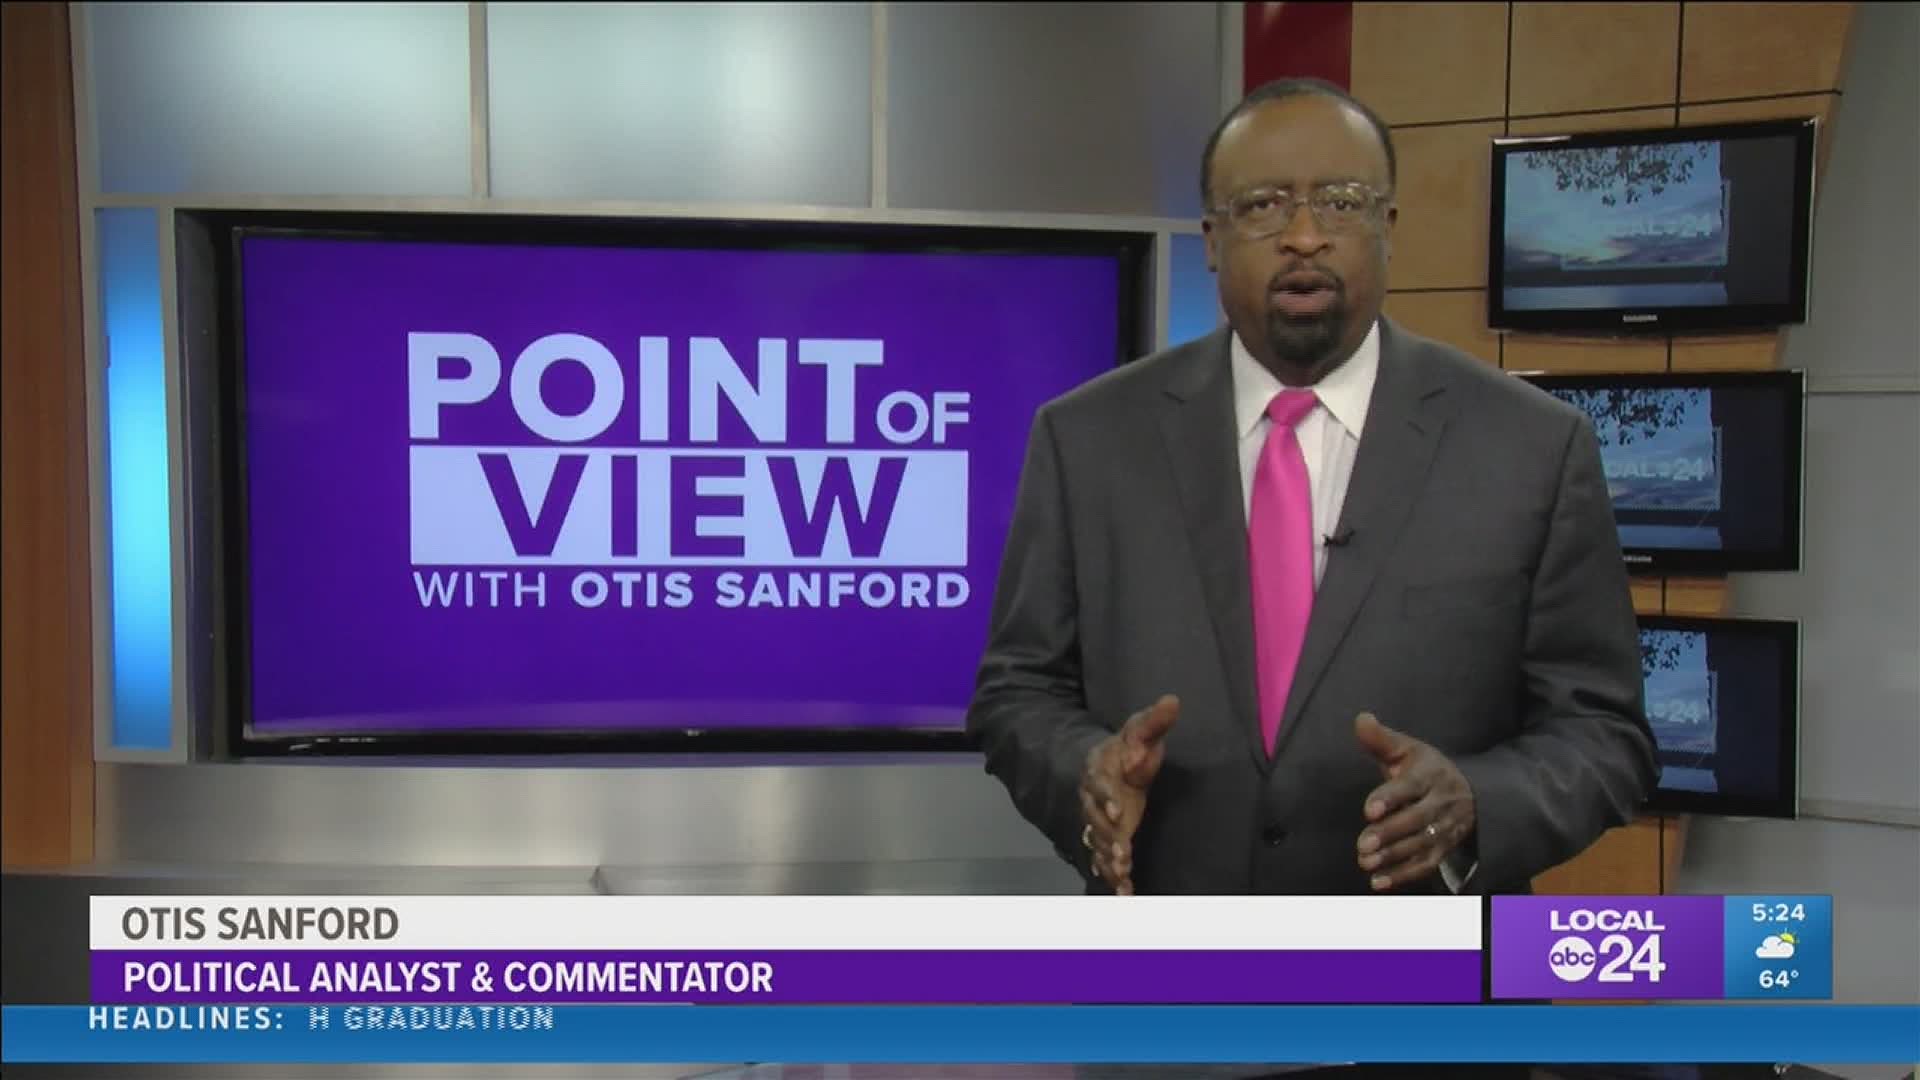 Local 24 News political analyst and commentator Otis Sanford shares his point of view on bills making their way before Tennessee lawmakers.